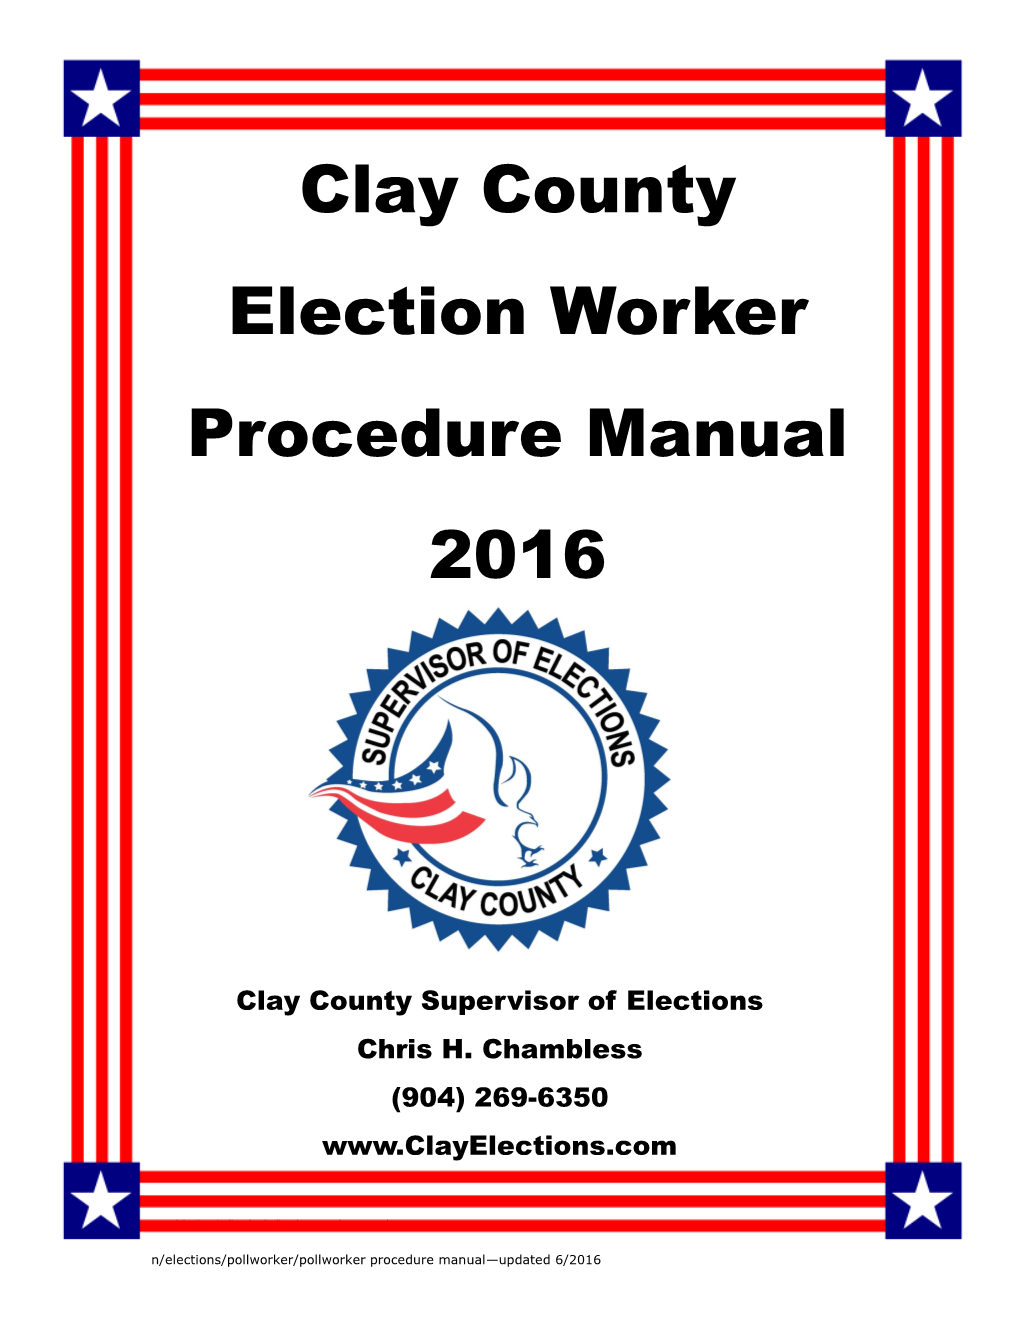 Clay County Election Worker Procedure Manual 2016